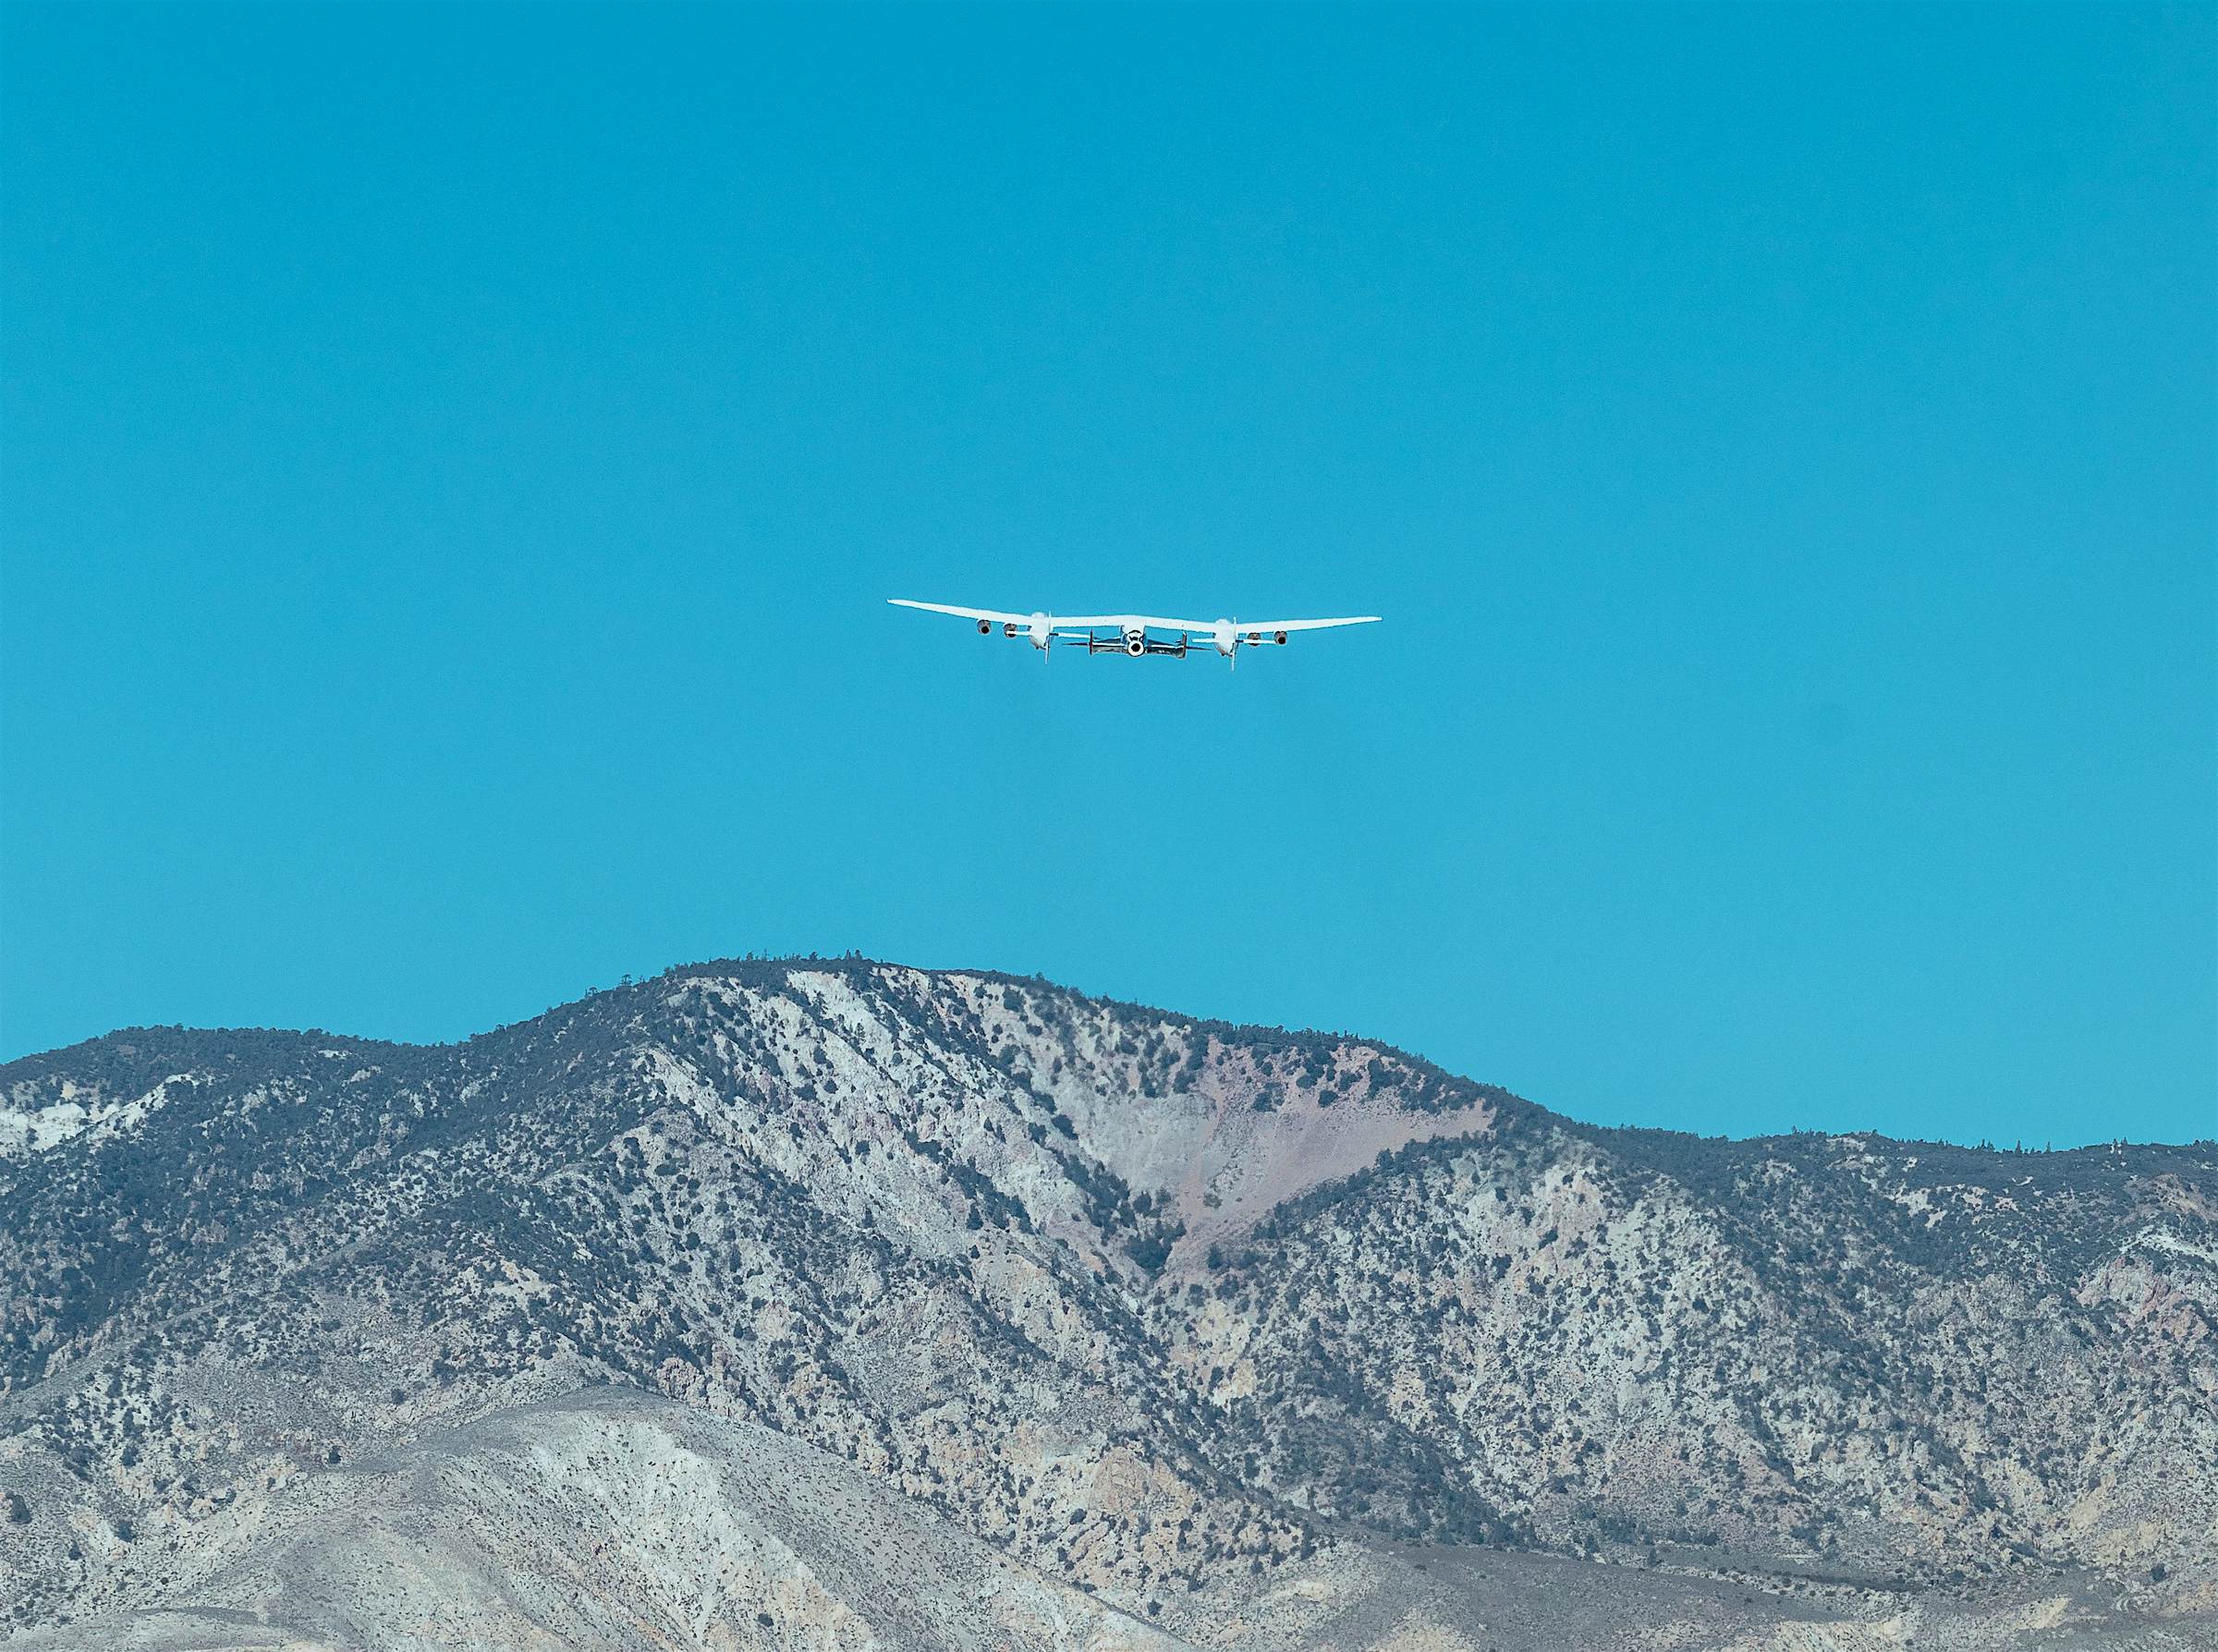 SpaceShipTwo Unity and VMS Eve take off from Mojave, CA and head towards Virgin Galactic's Gateway to Space, Spaceport America, New Mexico.